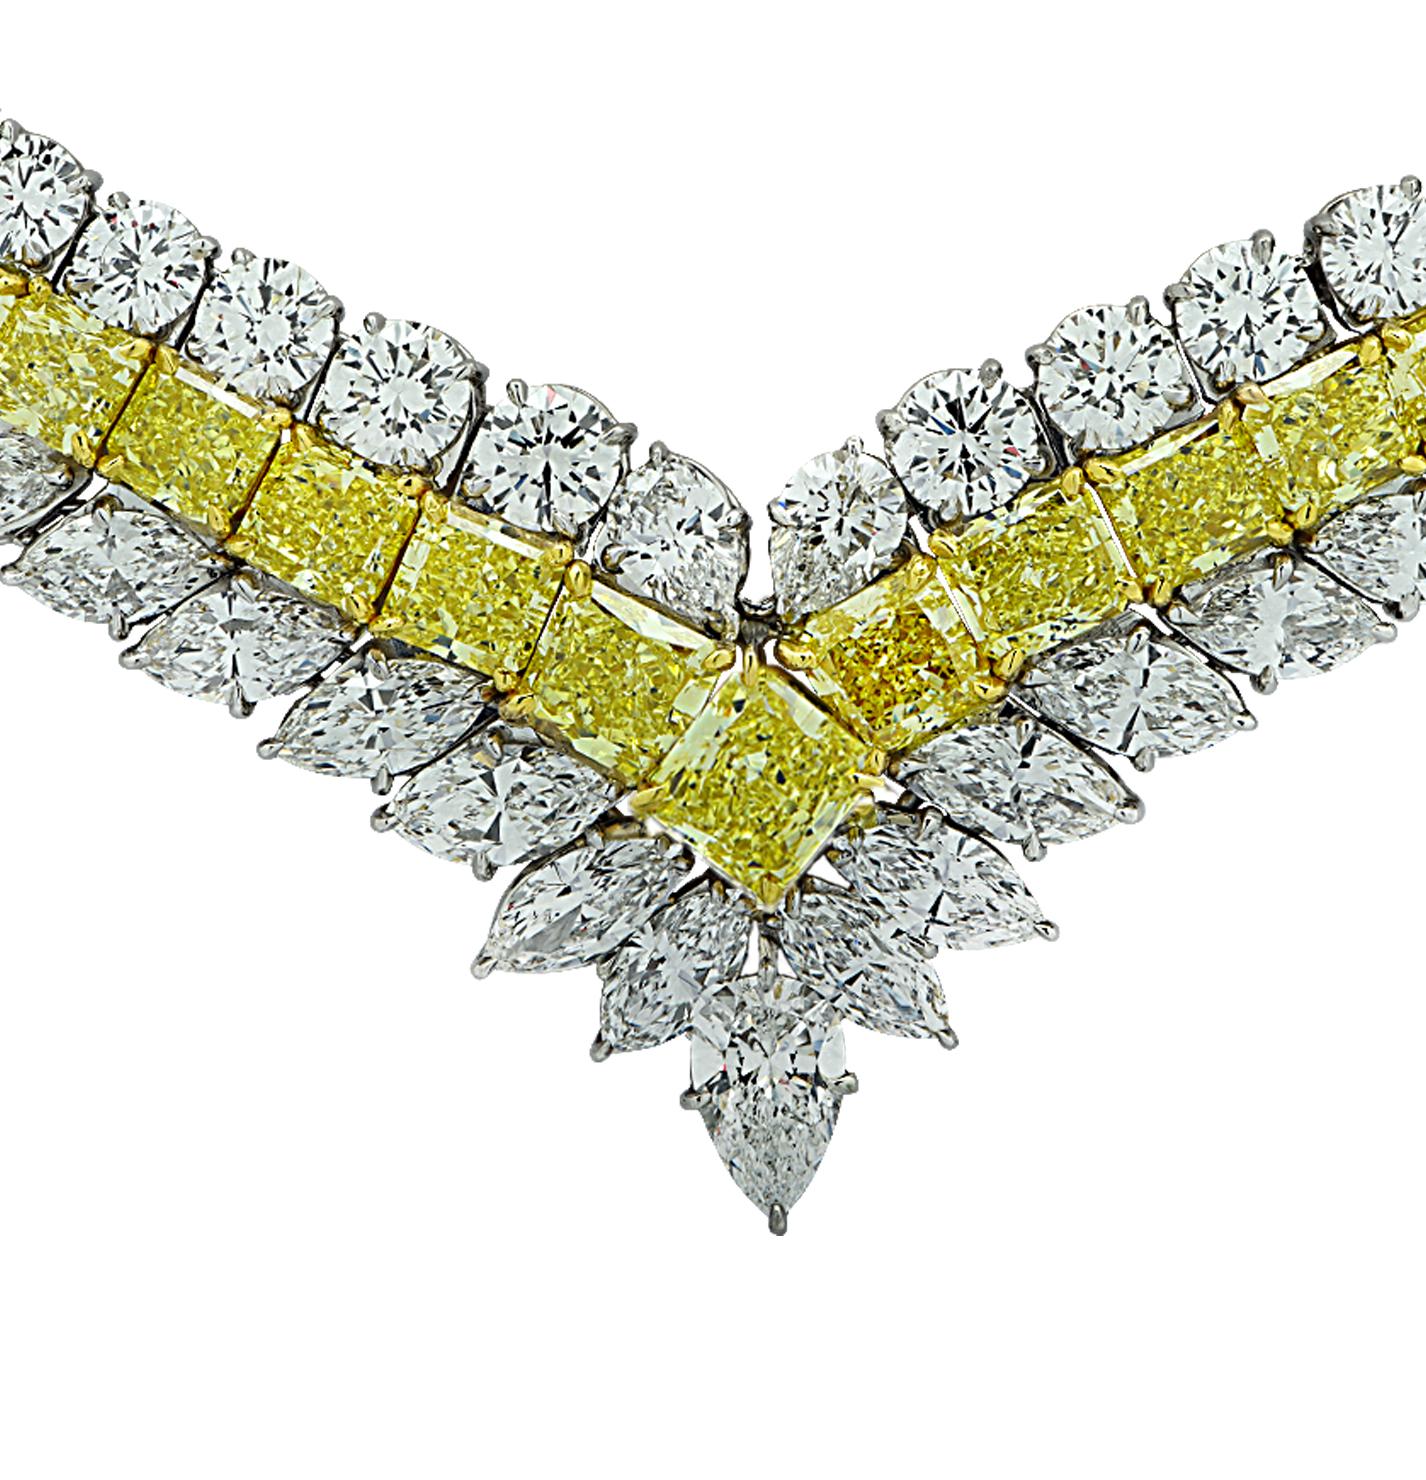 Sensational diamond necklace finely crafted in Platinum and 18 karat yellow gold, featuring Fancy Intense yellow diamonds and white diamonds weighing approximately 80.81 carats total. This exceptional necklace showcases 5 GIA Certified Fancy Intense